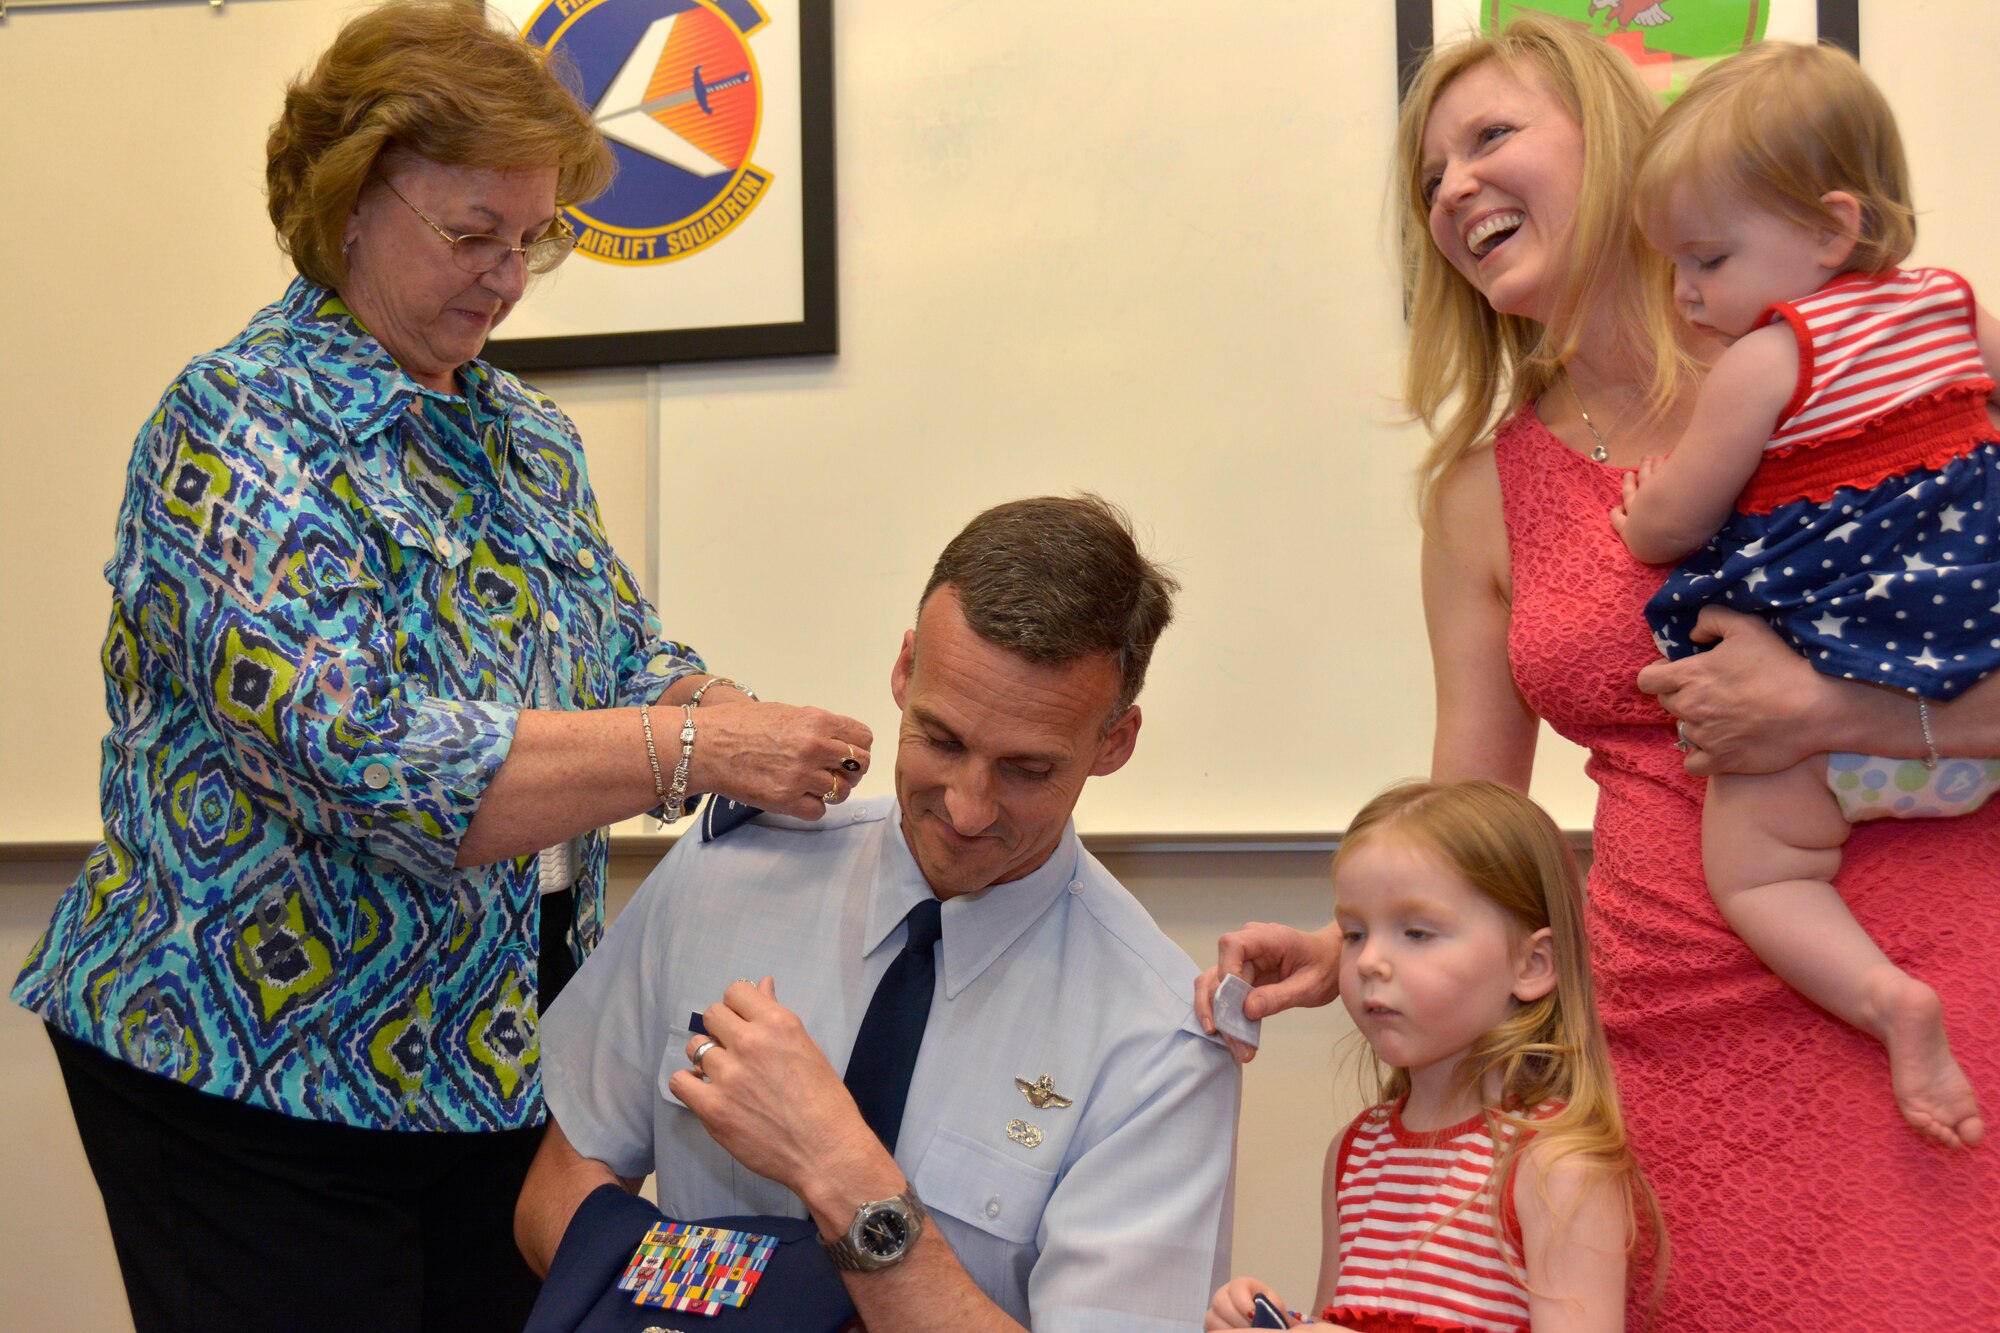 U.S. Air Force Lt. Col. Joseph H. Stepp IV, assisted mother, wife and daughters as they attached Stepp’s epaulets with his new rank of Colonel during a promotion ceremony held in his honor at the North Carolina Air National Guard Base, Charlotte Douglas International Airport, June 6, 2015. (U.S. Air National Guard photo by Senior Airman Laura Montgomery, 145th Public Affairs/Released)